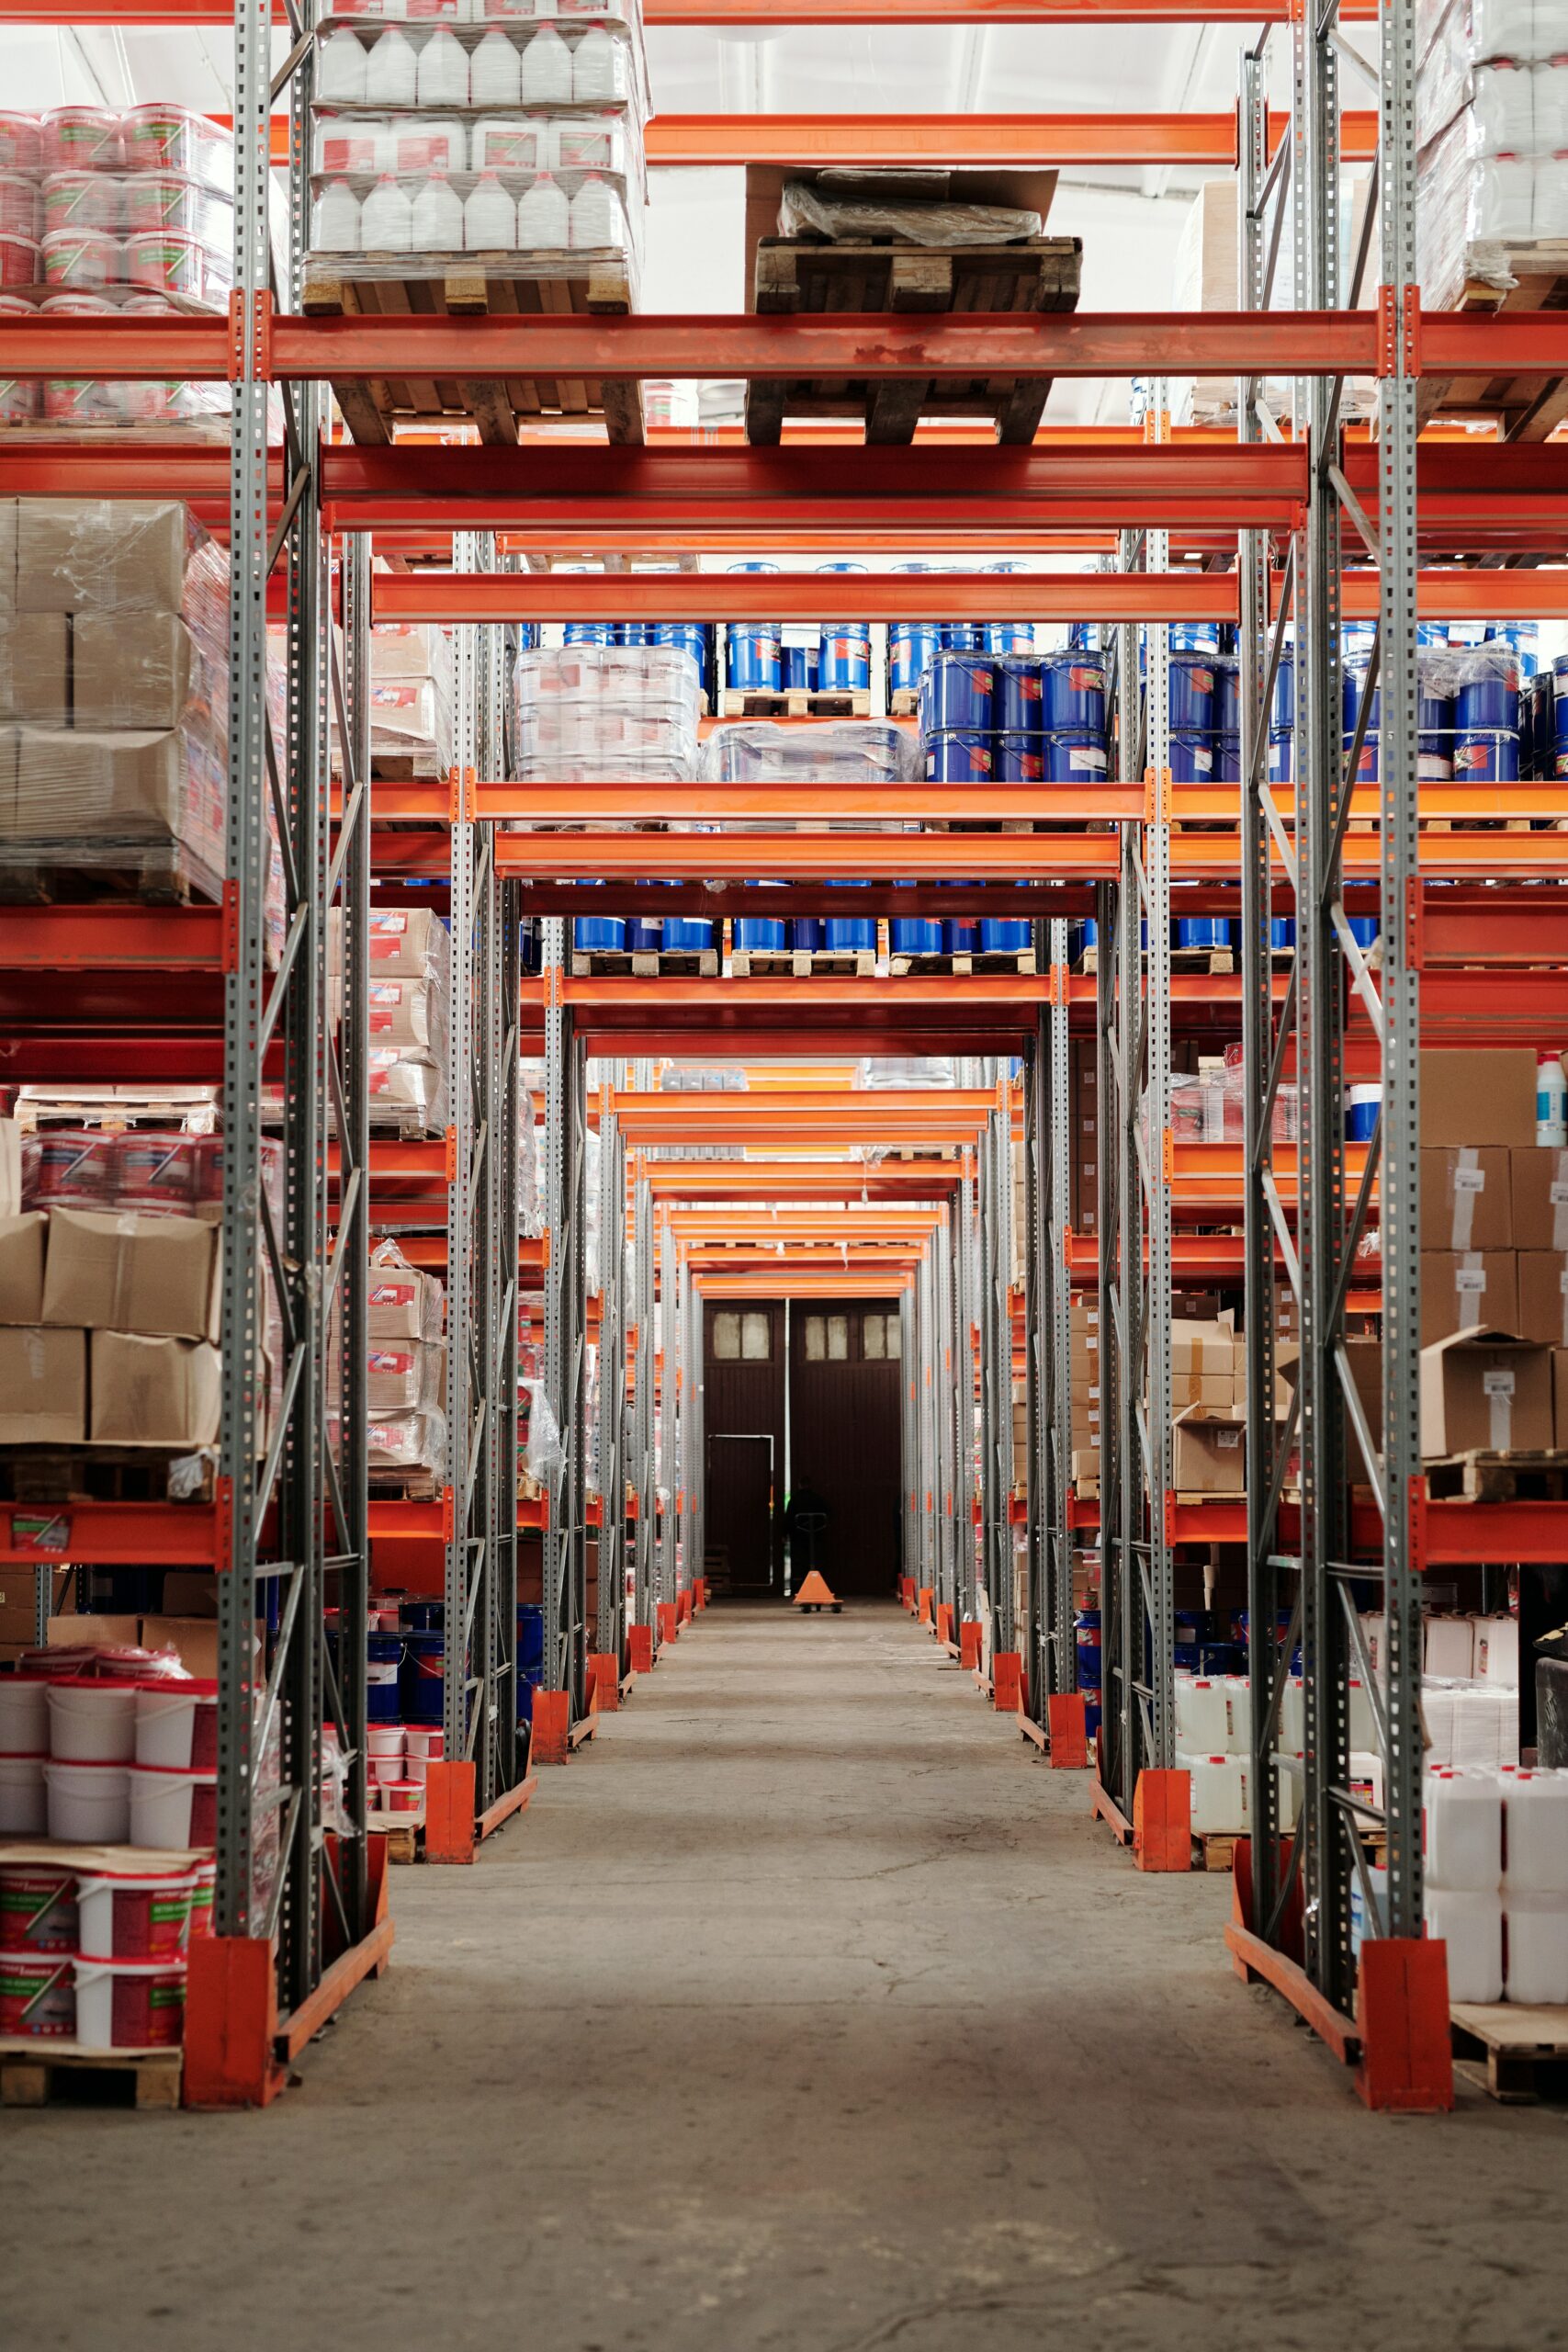 How To Choose The Best Inventory Management System For Your Business?